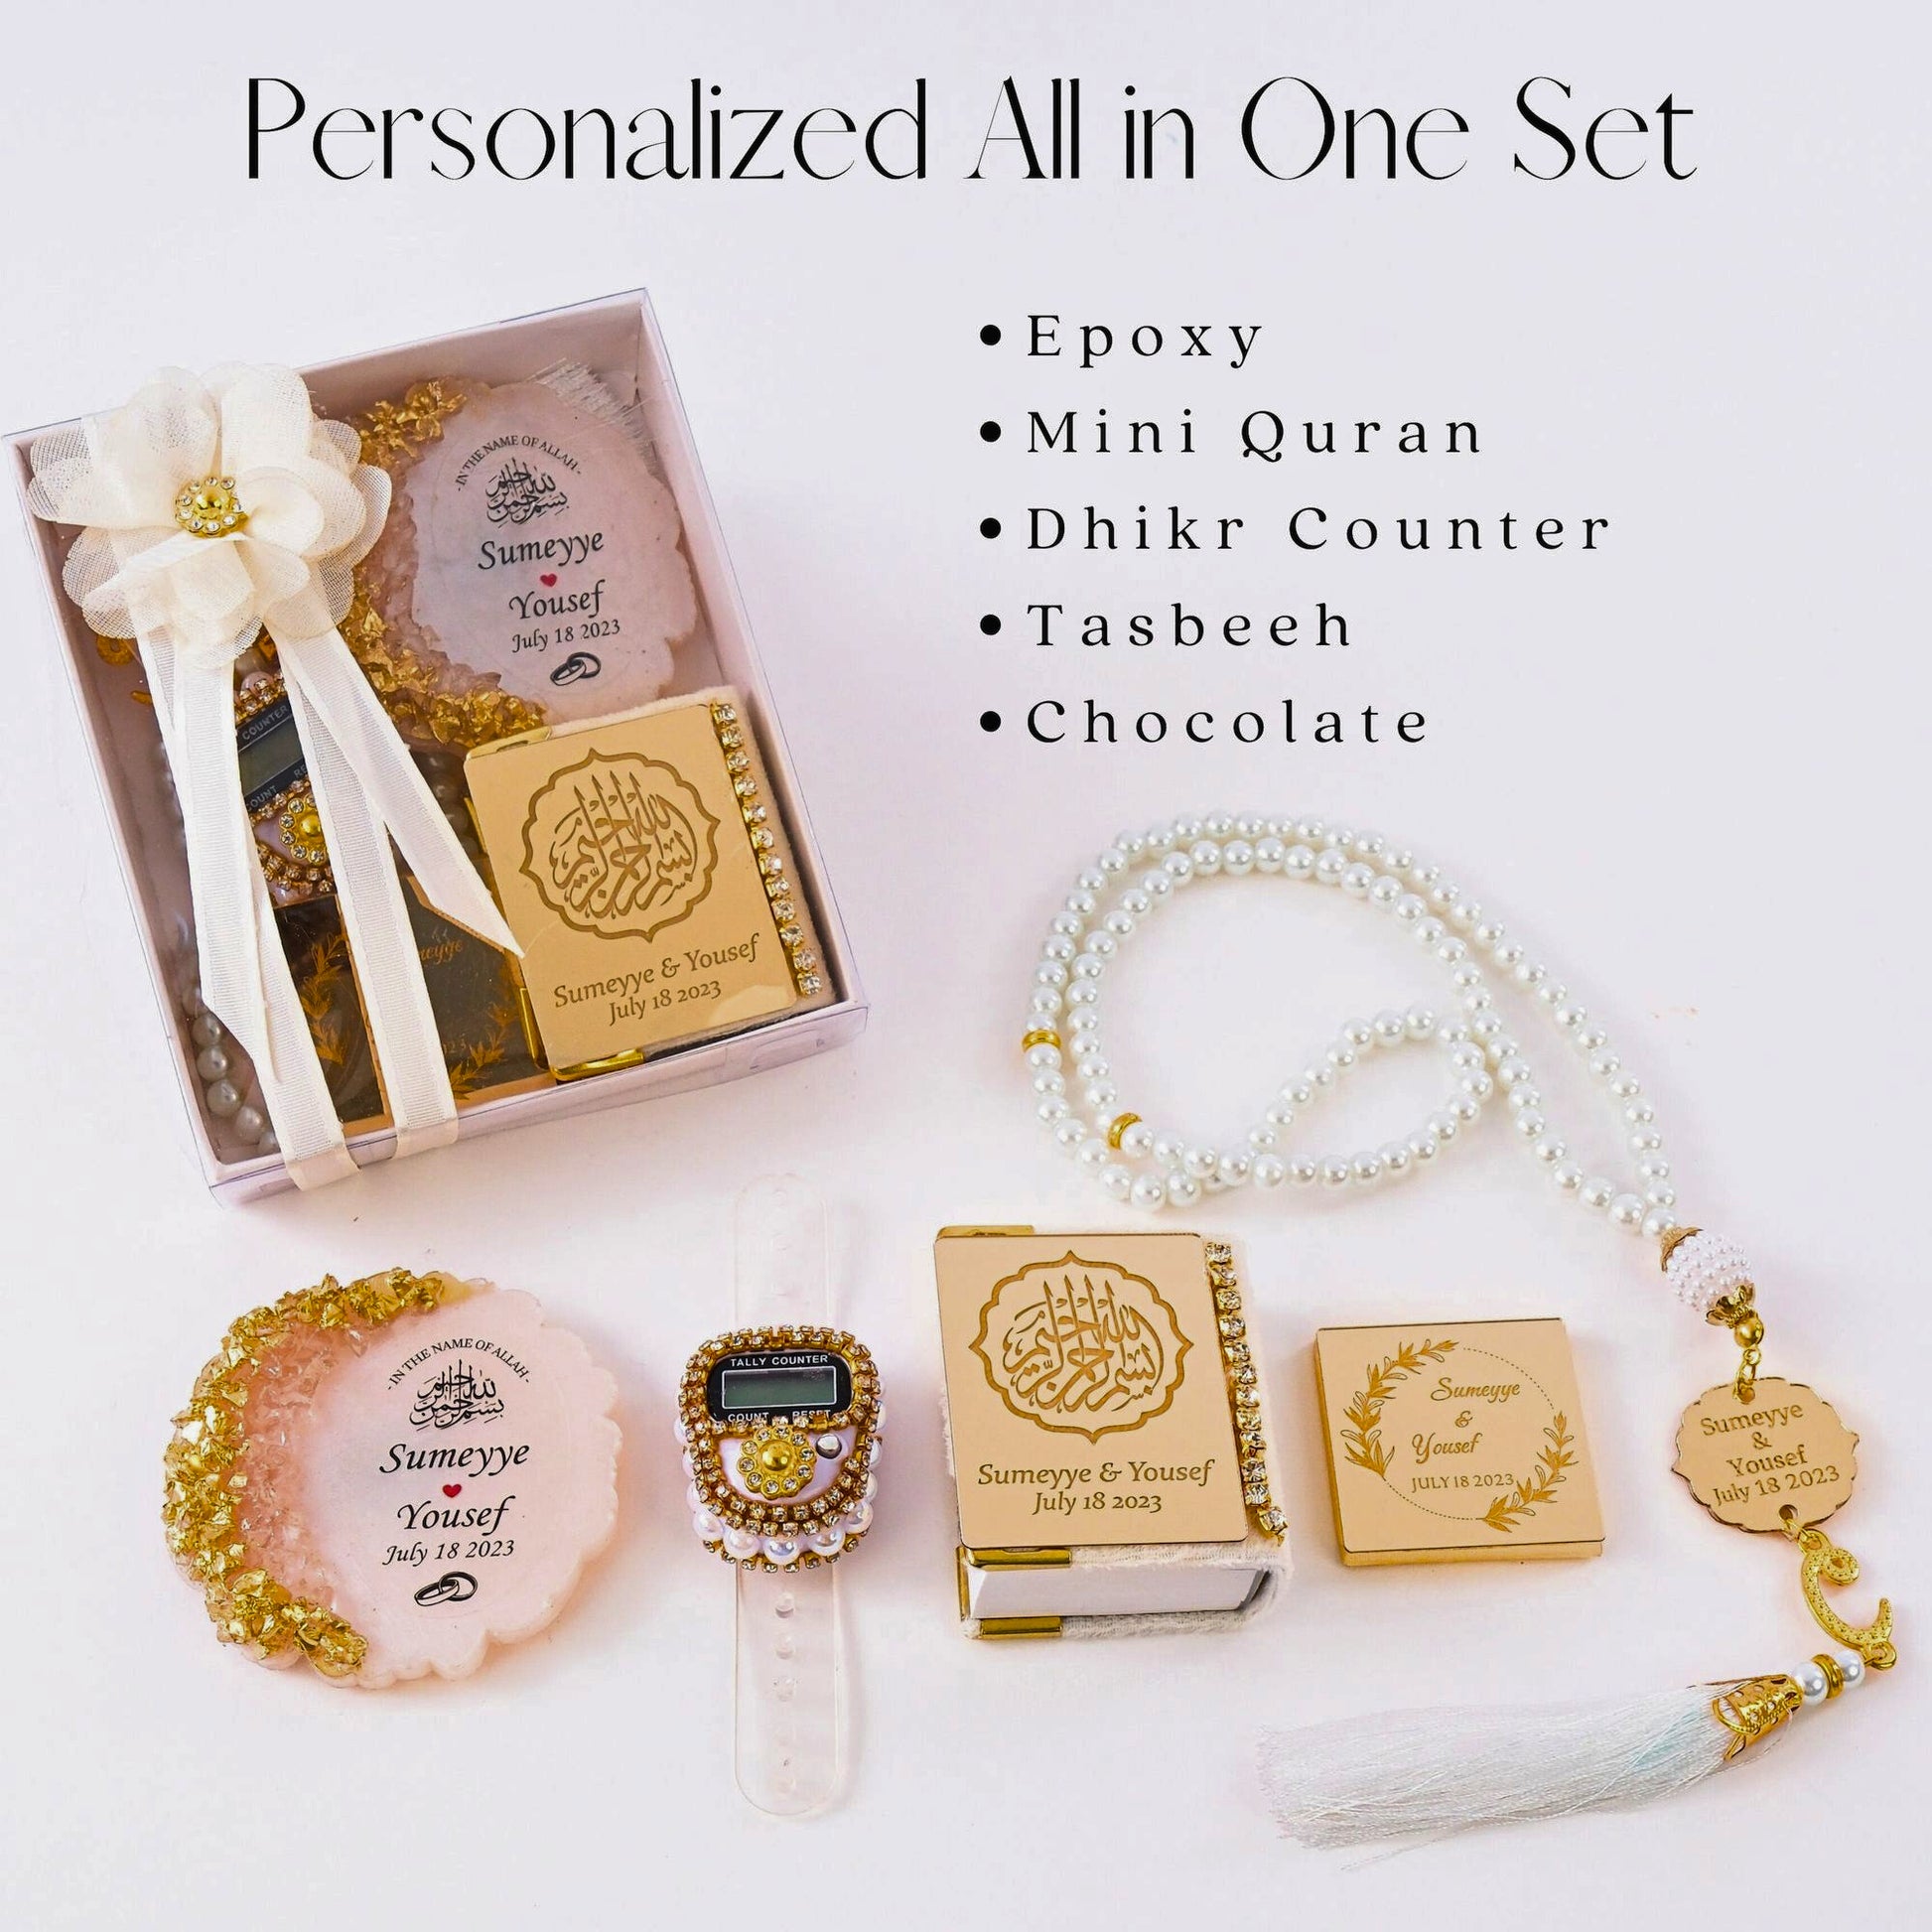 Personalized All in One Set Gift Wedding Baby Shower Eid Islam Muslim. Explore an exquisite collection of customized Islamic handmade gifts suitable for various occasions, including Weddings, Nikkah ceremonies, Engagements, Baby Showers, Bridal Showers, Birthdays, Ameen celebrations, Islamic parties, Ramadan, Eid, Hajj, Umrah, Mother’s Day, Father’s Day, Valentine’s Day, Anniversaries, and Graduations. Each gift is thoughtfully crafted to reflect the essence of these special moments.